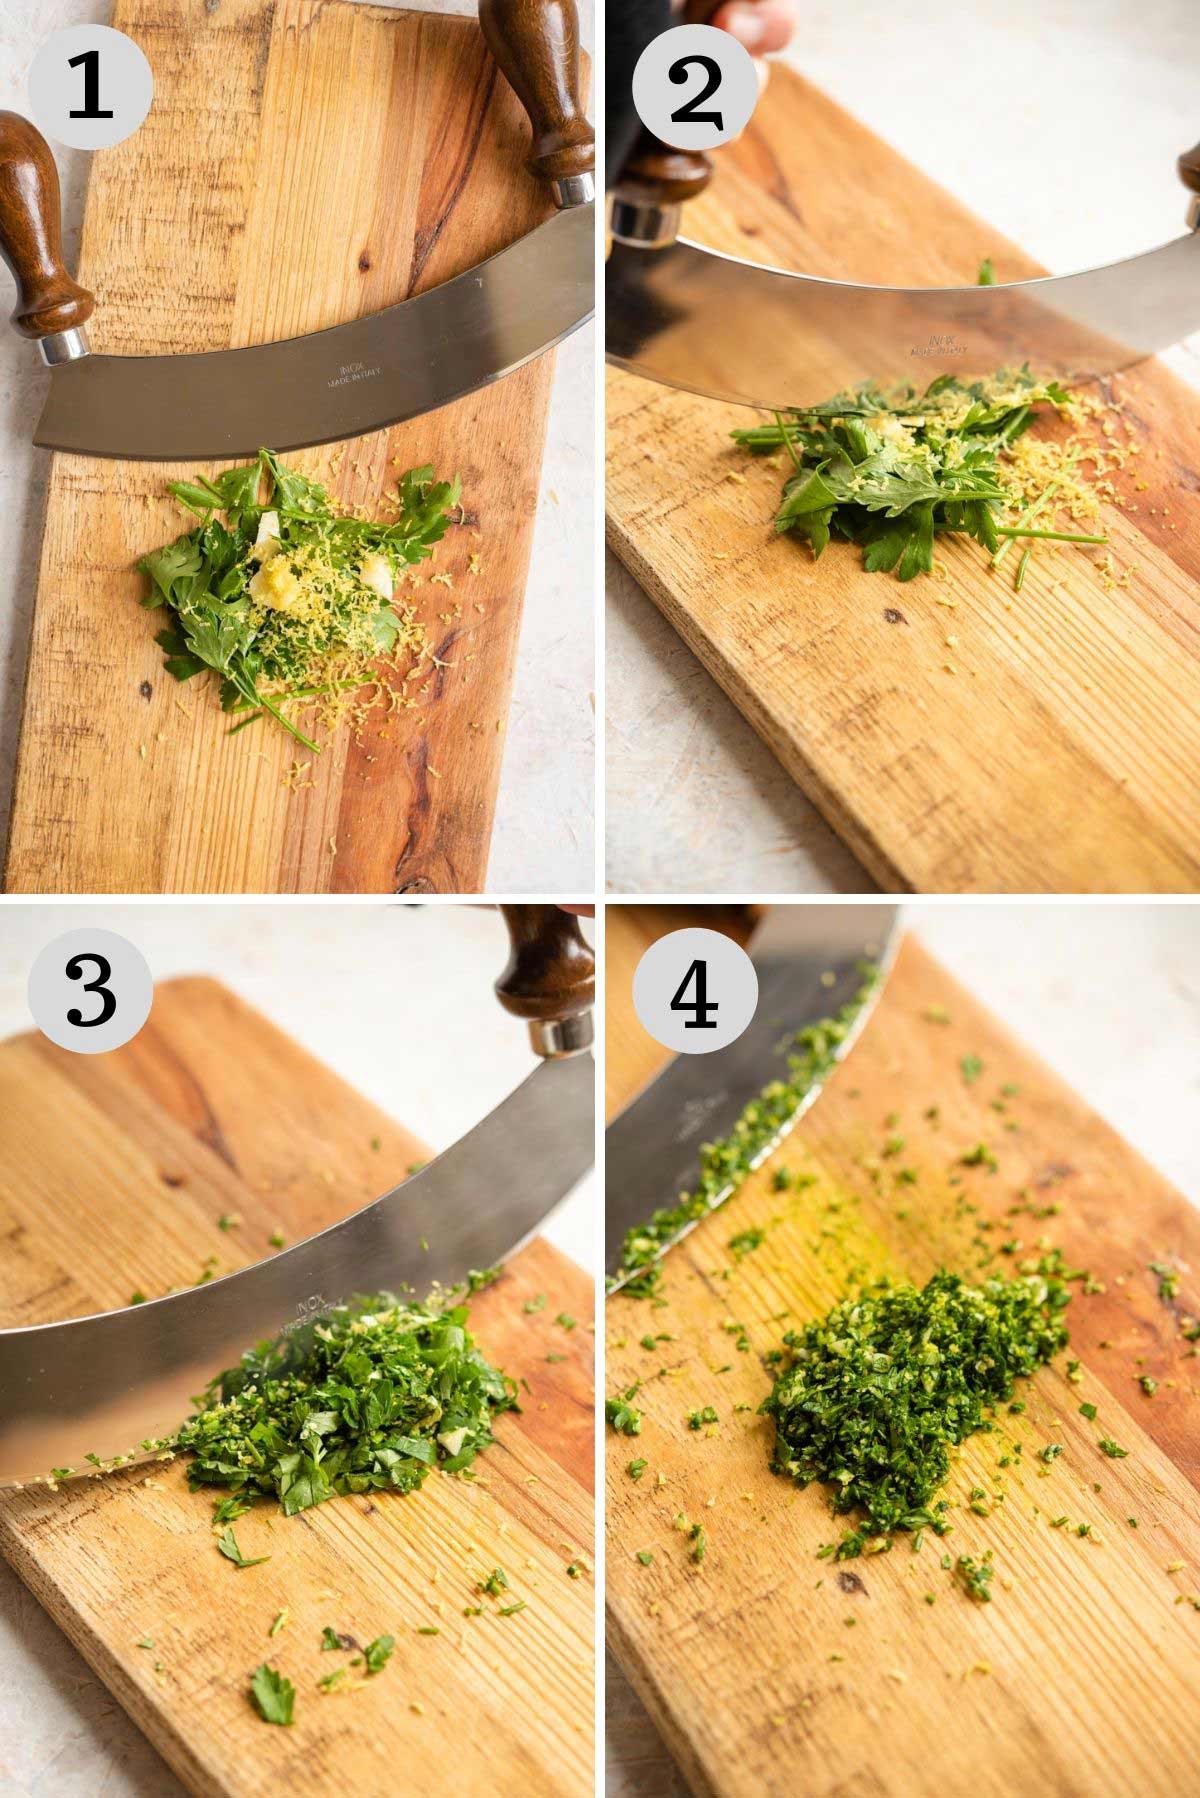 Step by step photos showing how to make gremolata